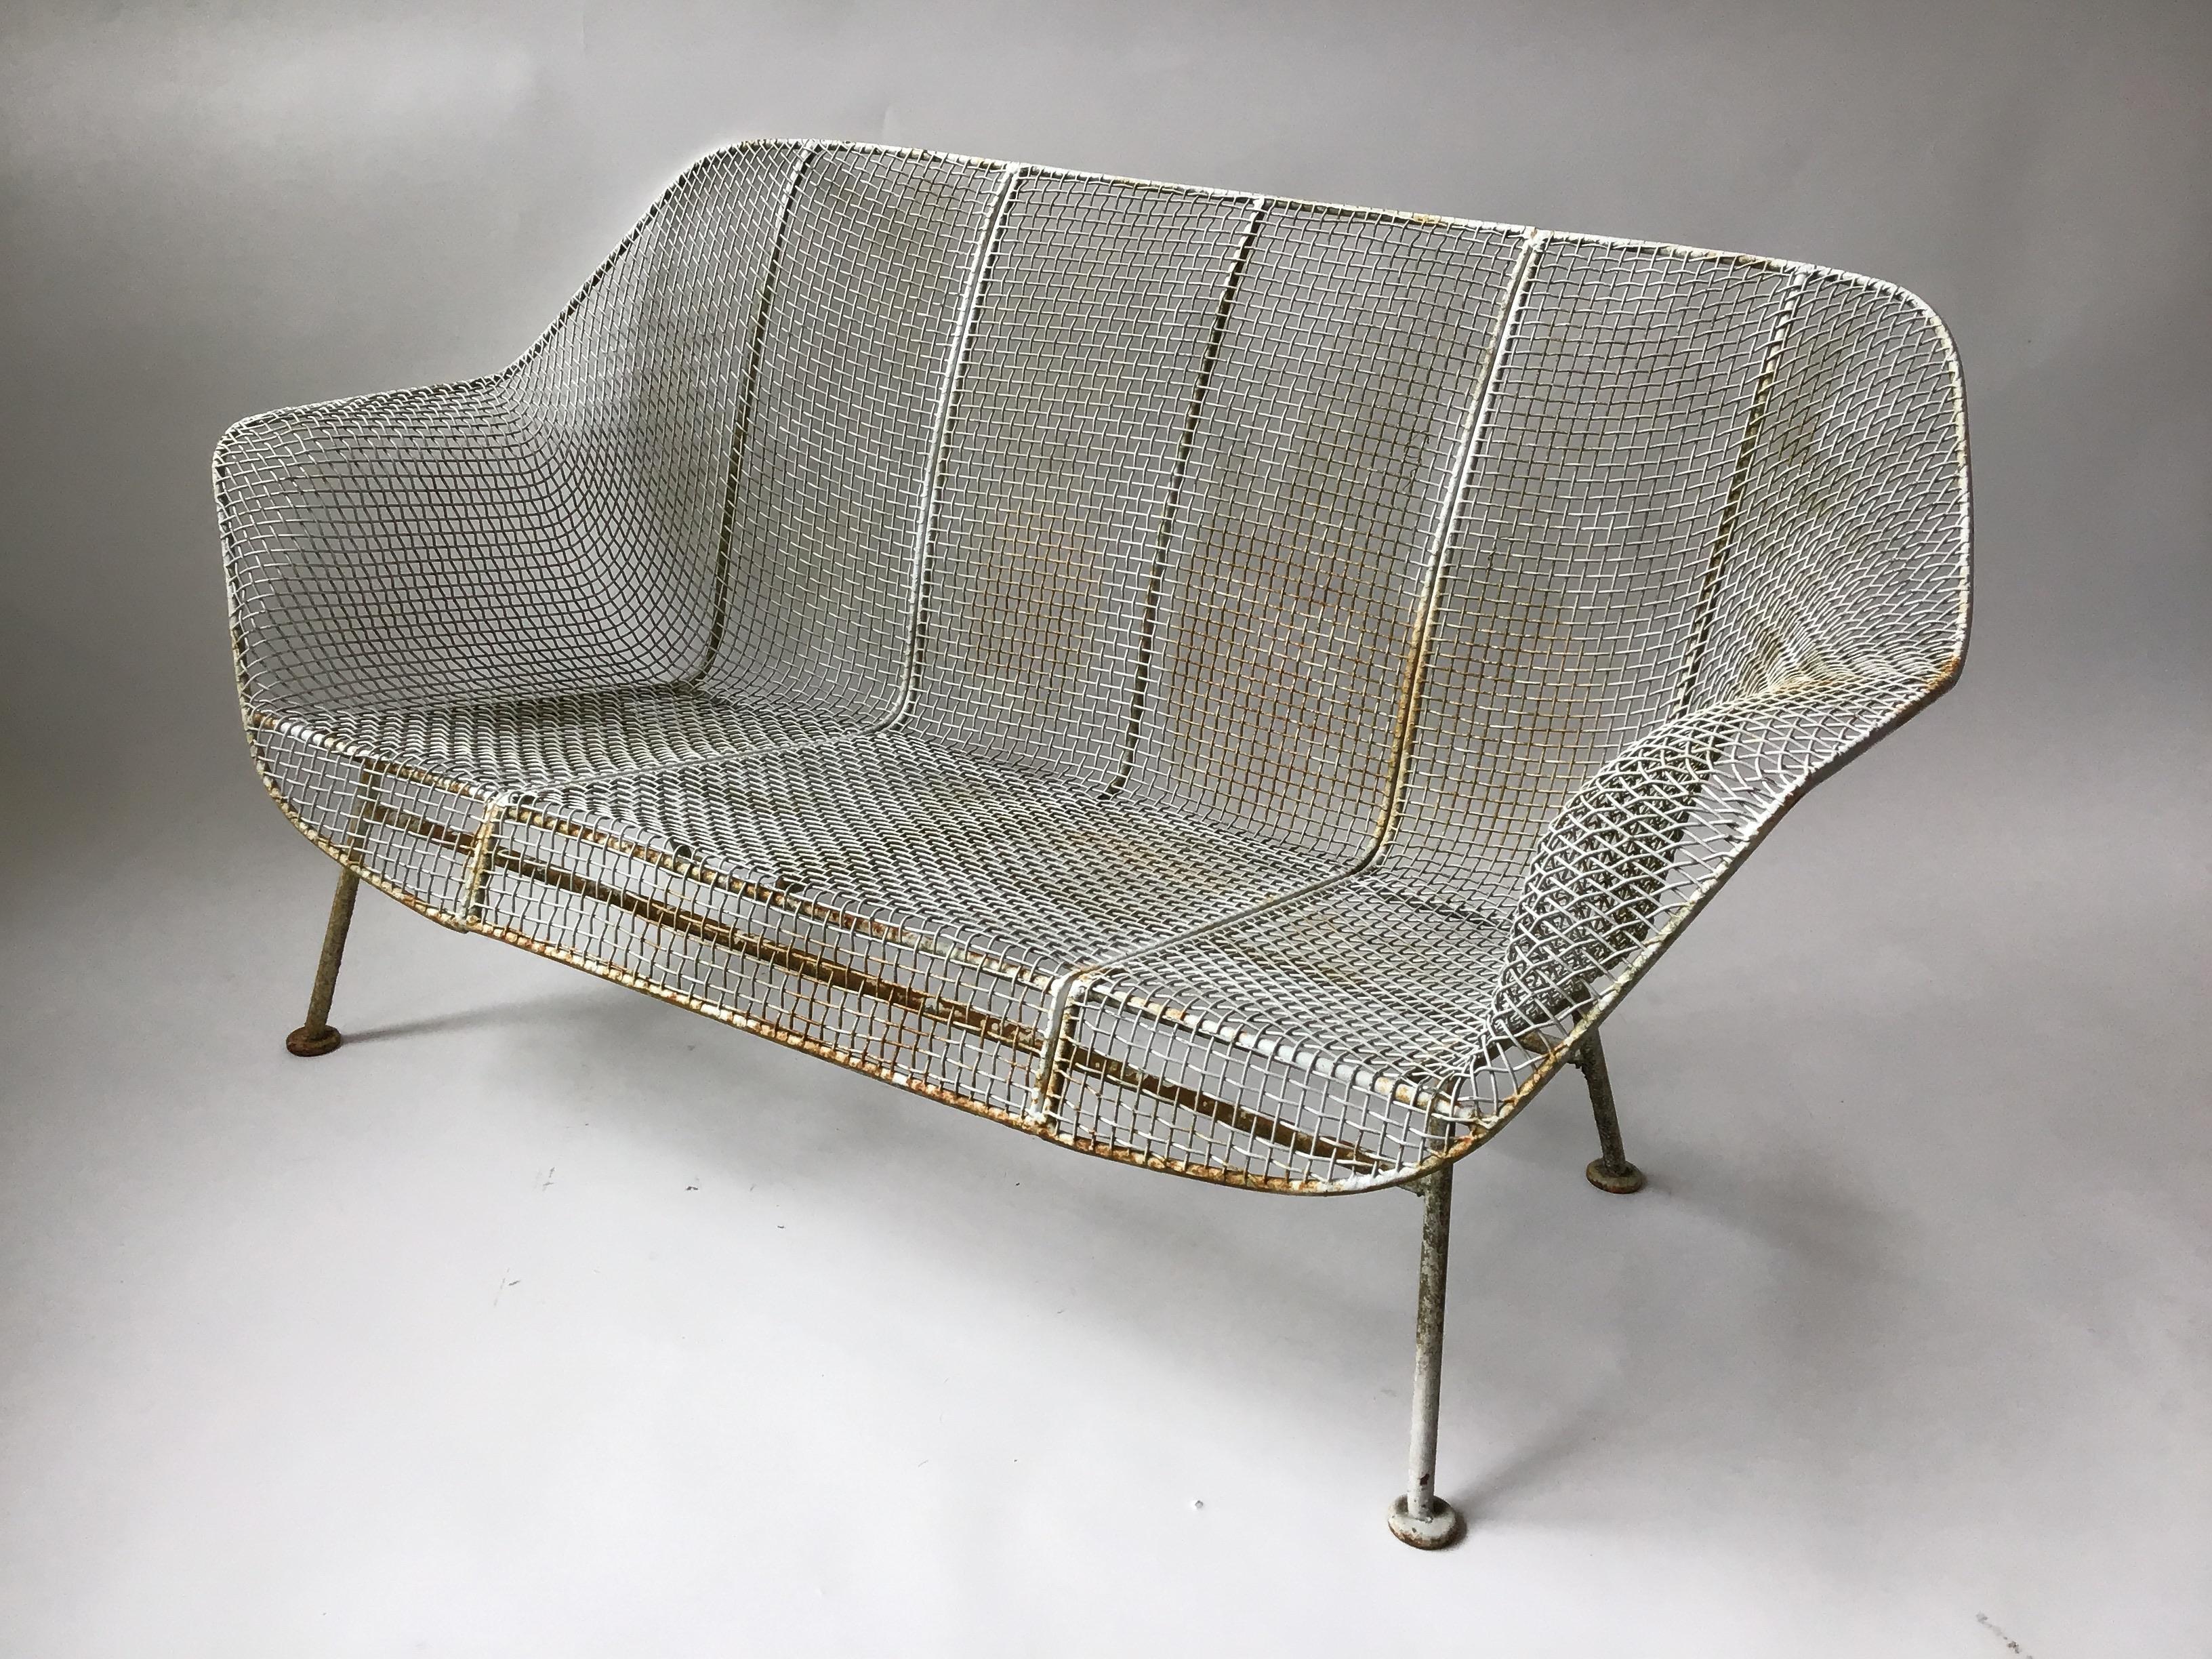 1950s Woodard sculptura iron mesh settee. Needs painting. Out of a Southampton, N.Y. Estate.